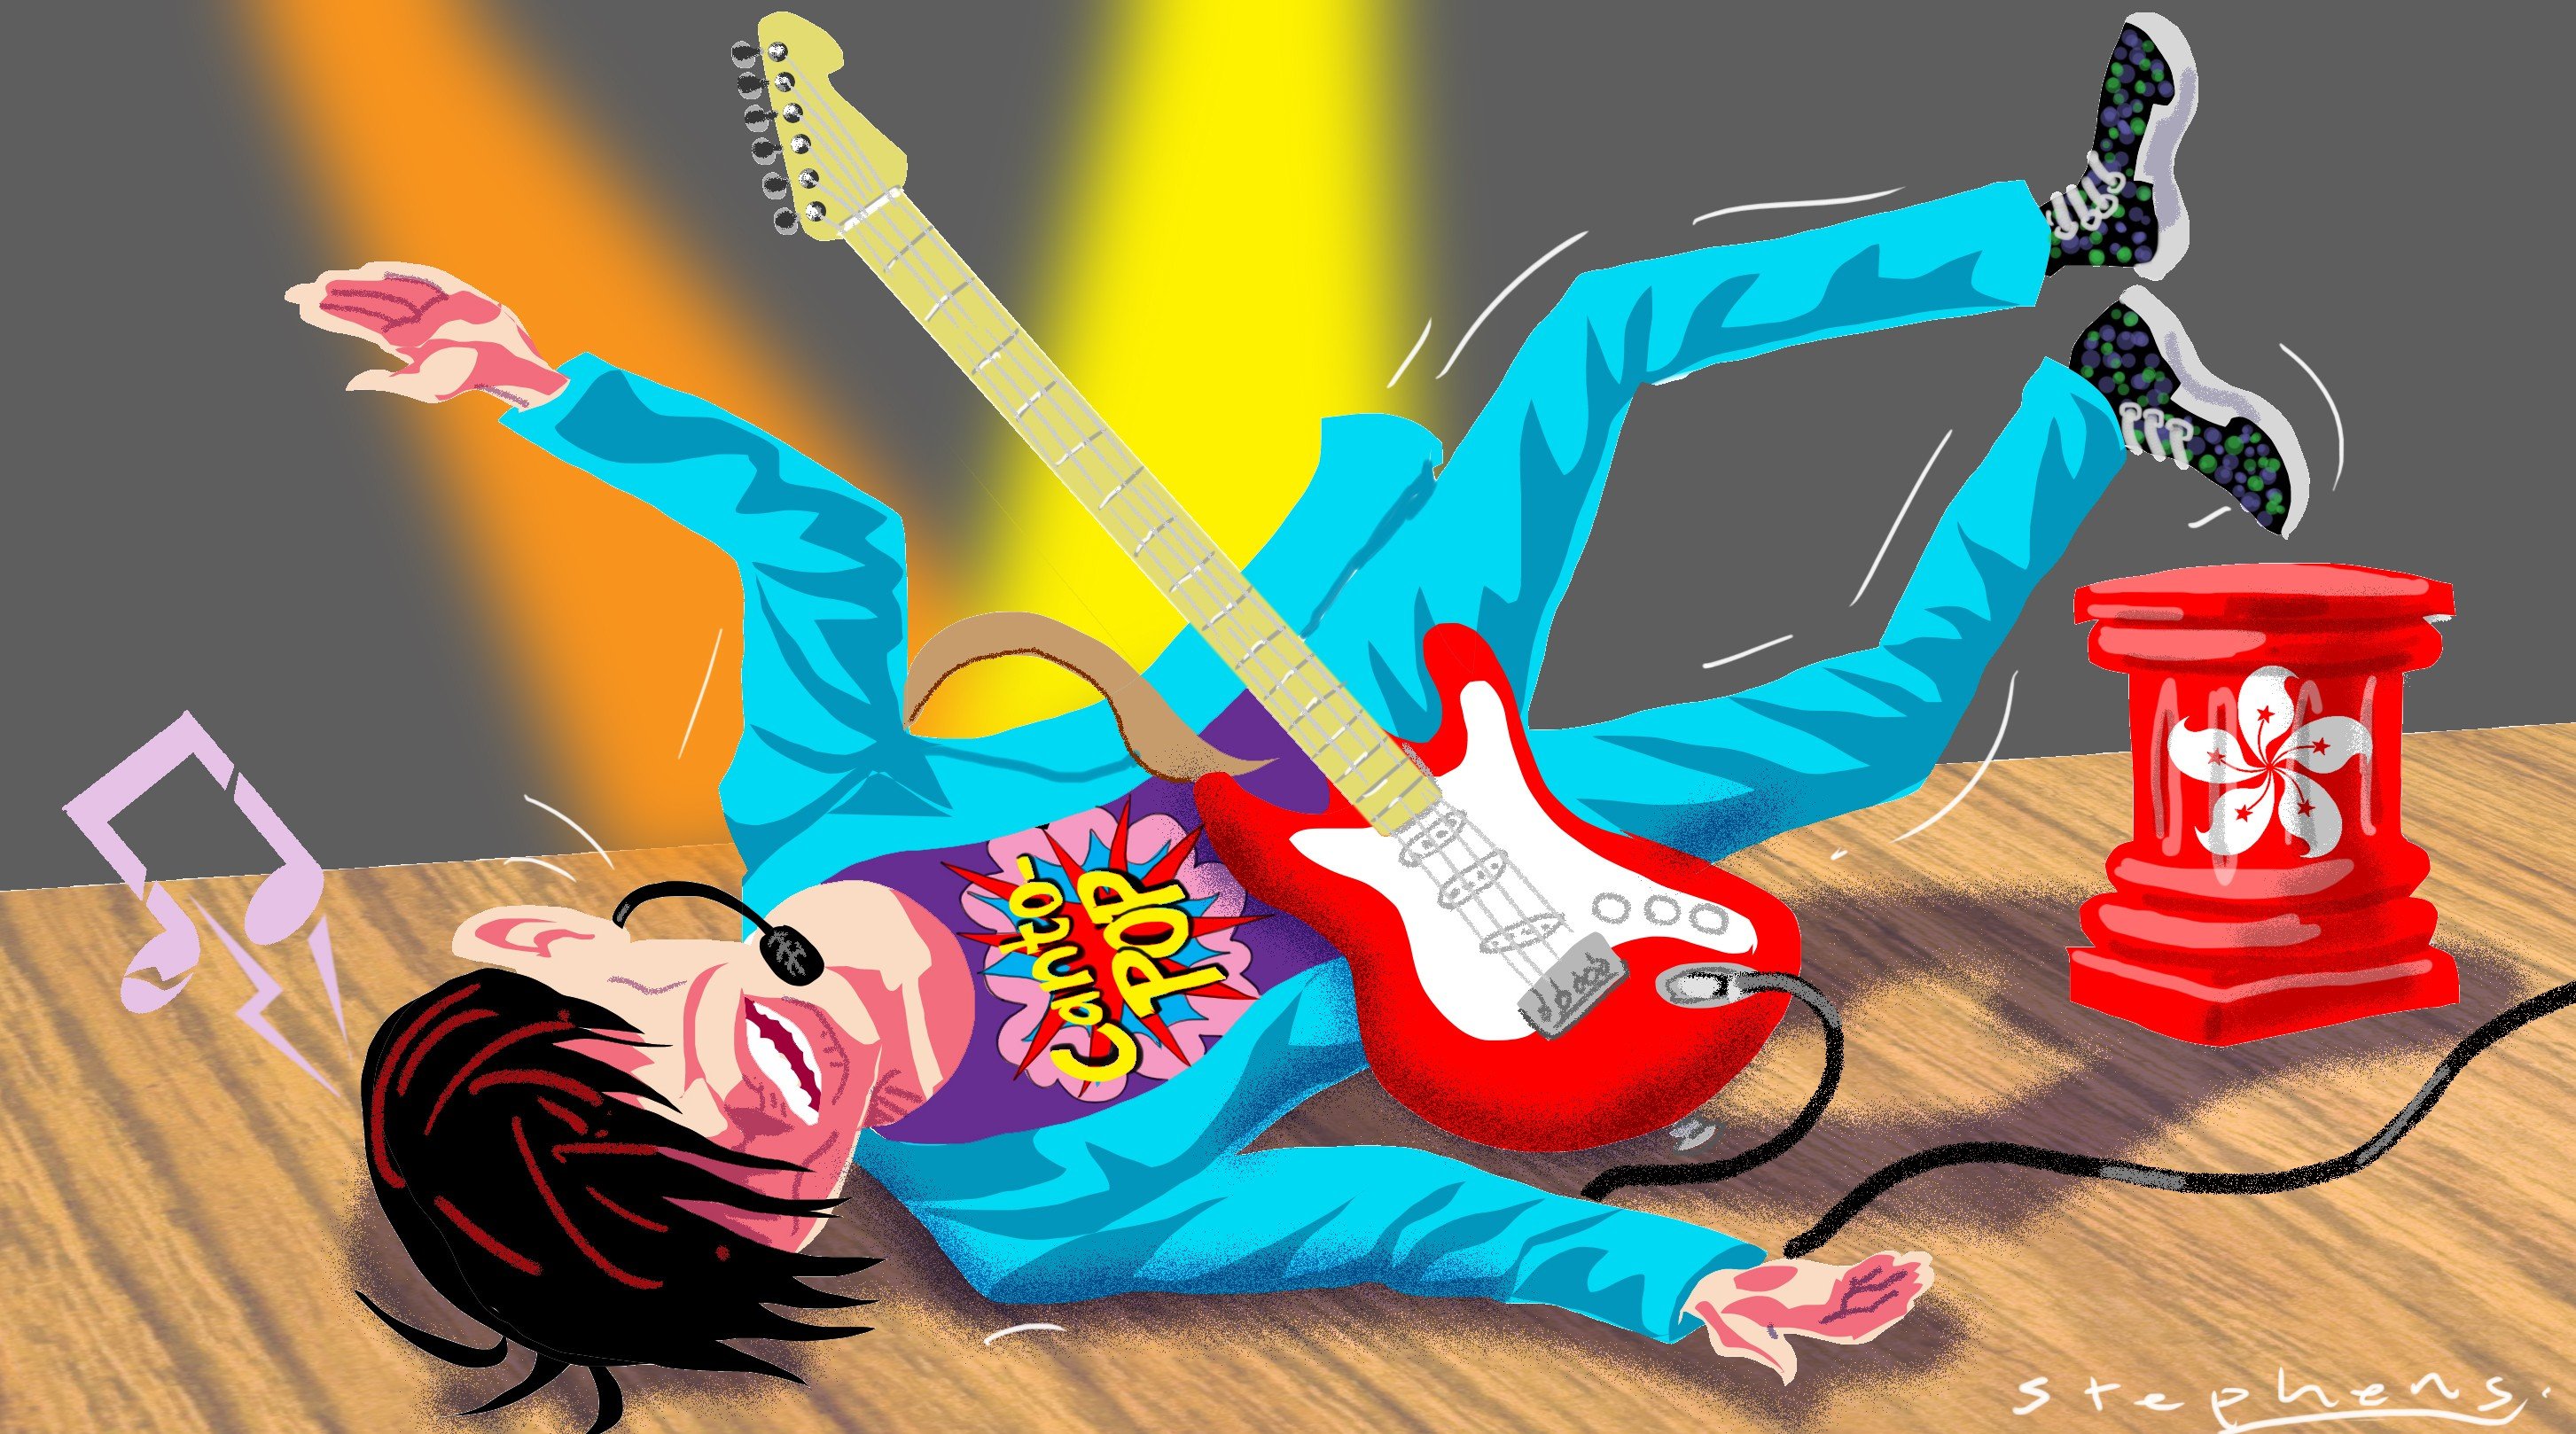 The glory days of Canto-pop seem to be in the past. Illustration: Craig Stephens